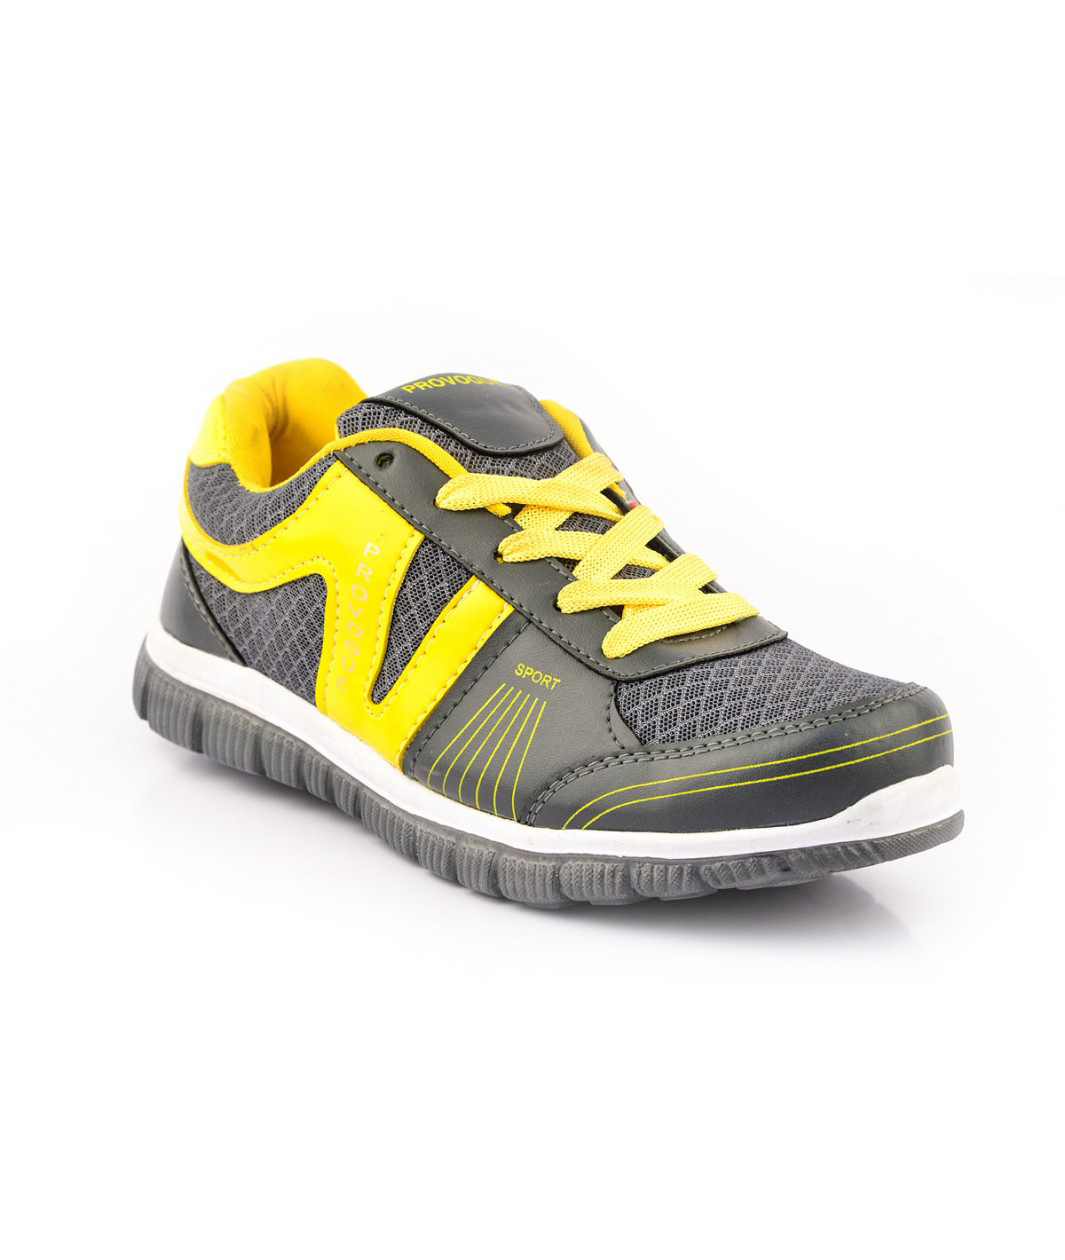 Buy Provogue Men's Gray Sports Shoes Online @ ₹499 from ShopClues